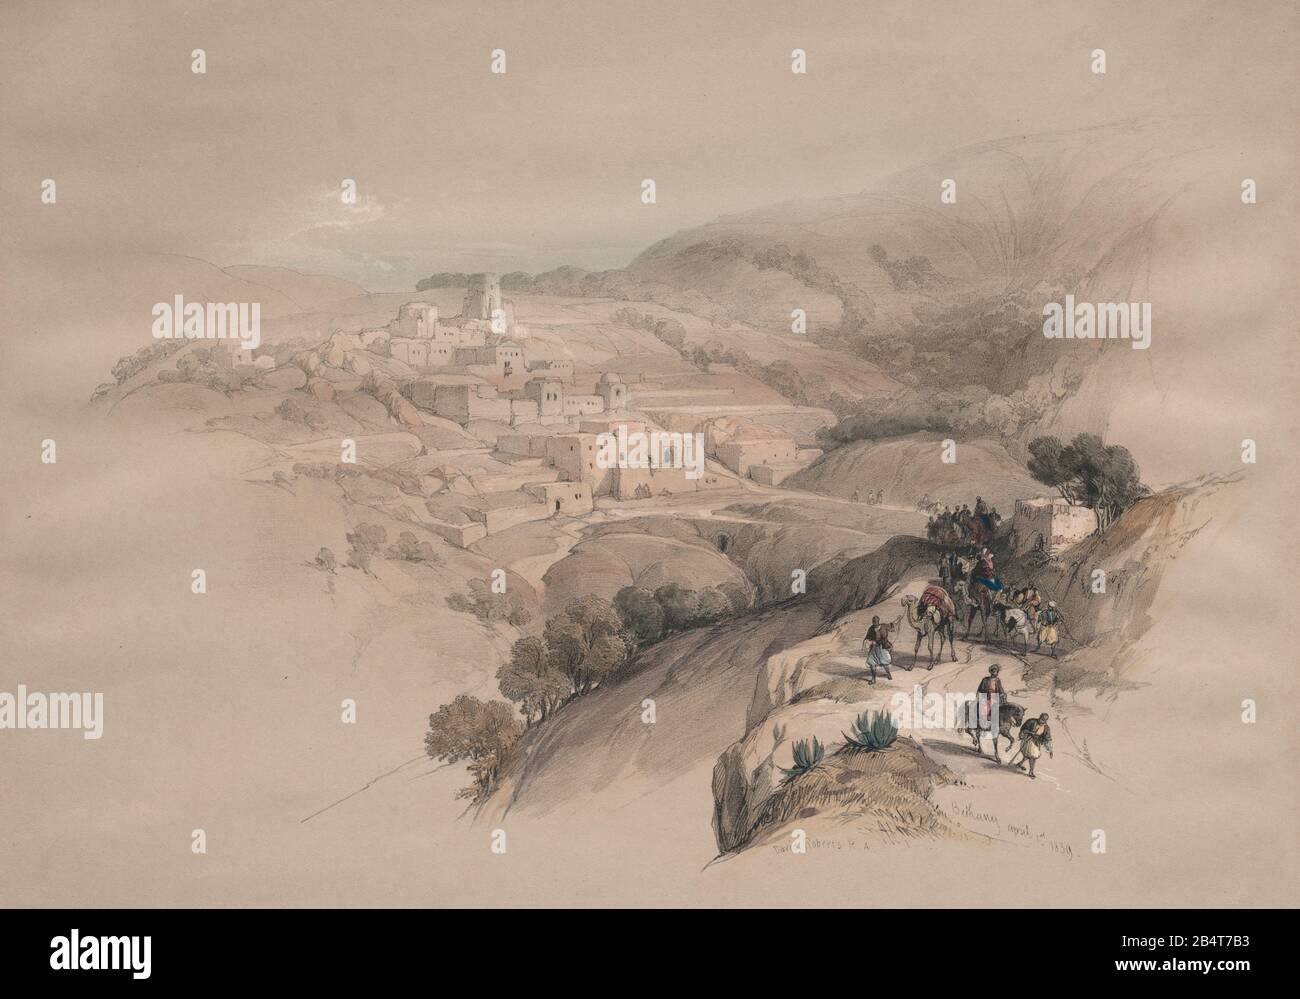 The village of Bethany Color lithograph by David Roberts (1796-1864). An engraving reprint by Louis Haghe was published in a the book 'The Holy Land, Syria, Idumea, Arabia, Egypt and Nubia. in 1855 by D. Appleton & Co., 346 & 348 Broadway in New York. Stock Photo